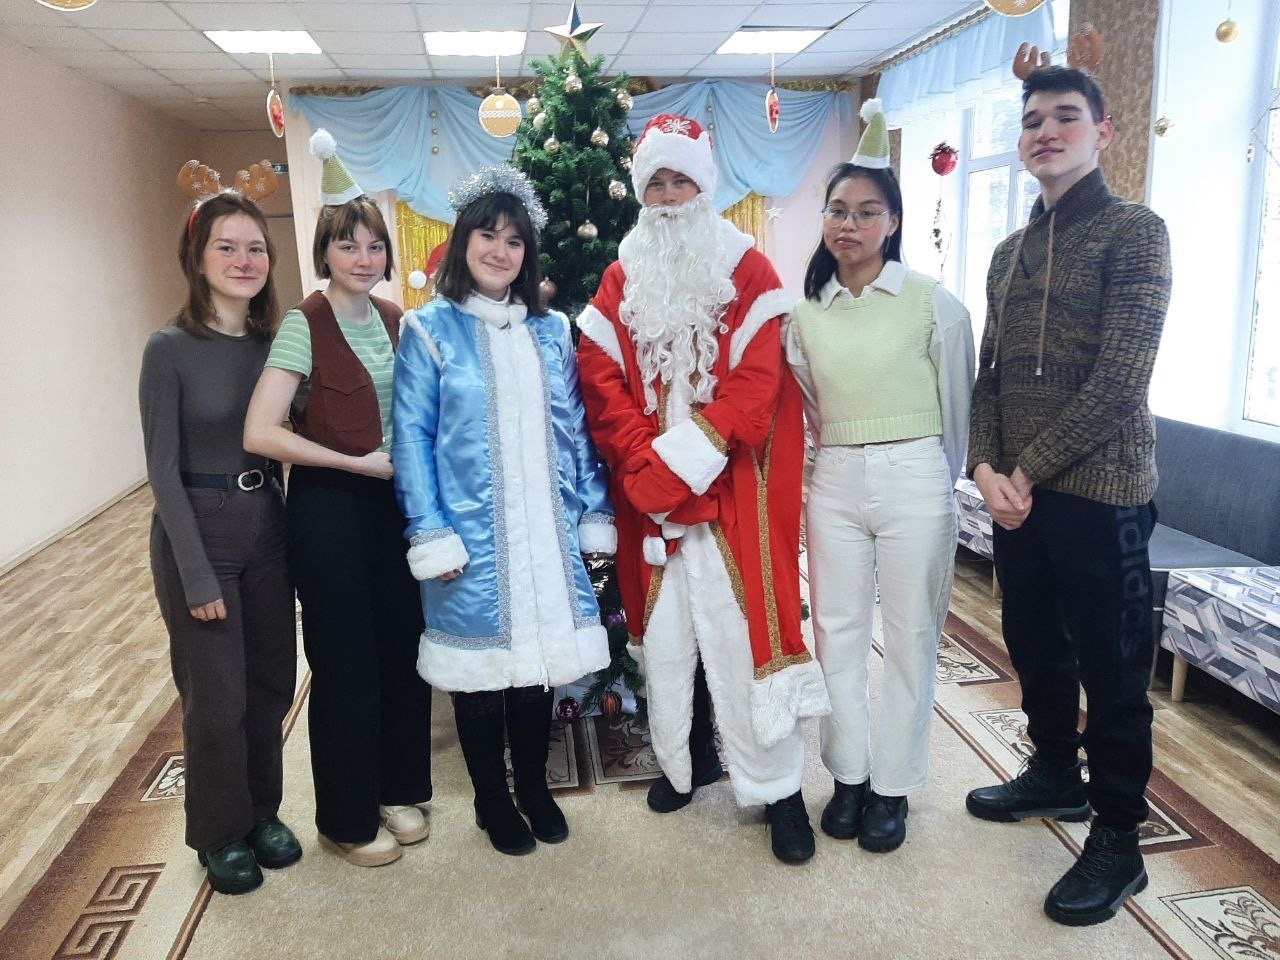 Volunteers of the Volunteer Center of UlSTU congratulated the pupils of orphanages of the Ulyanovsk region on the New Year